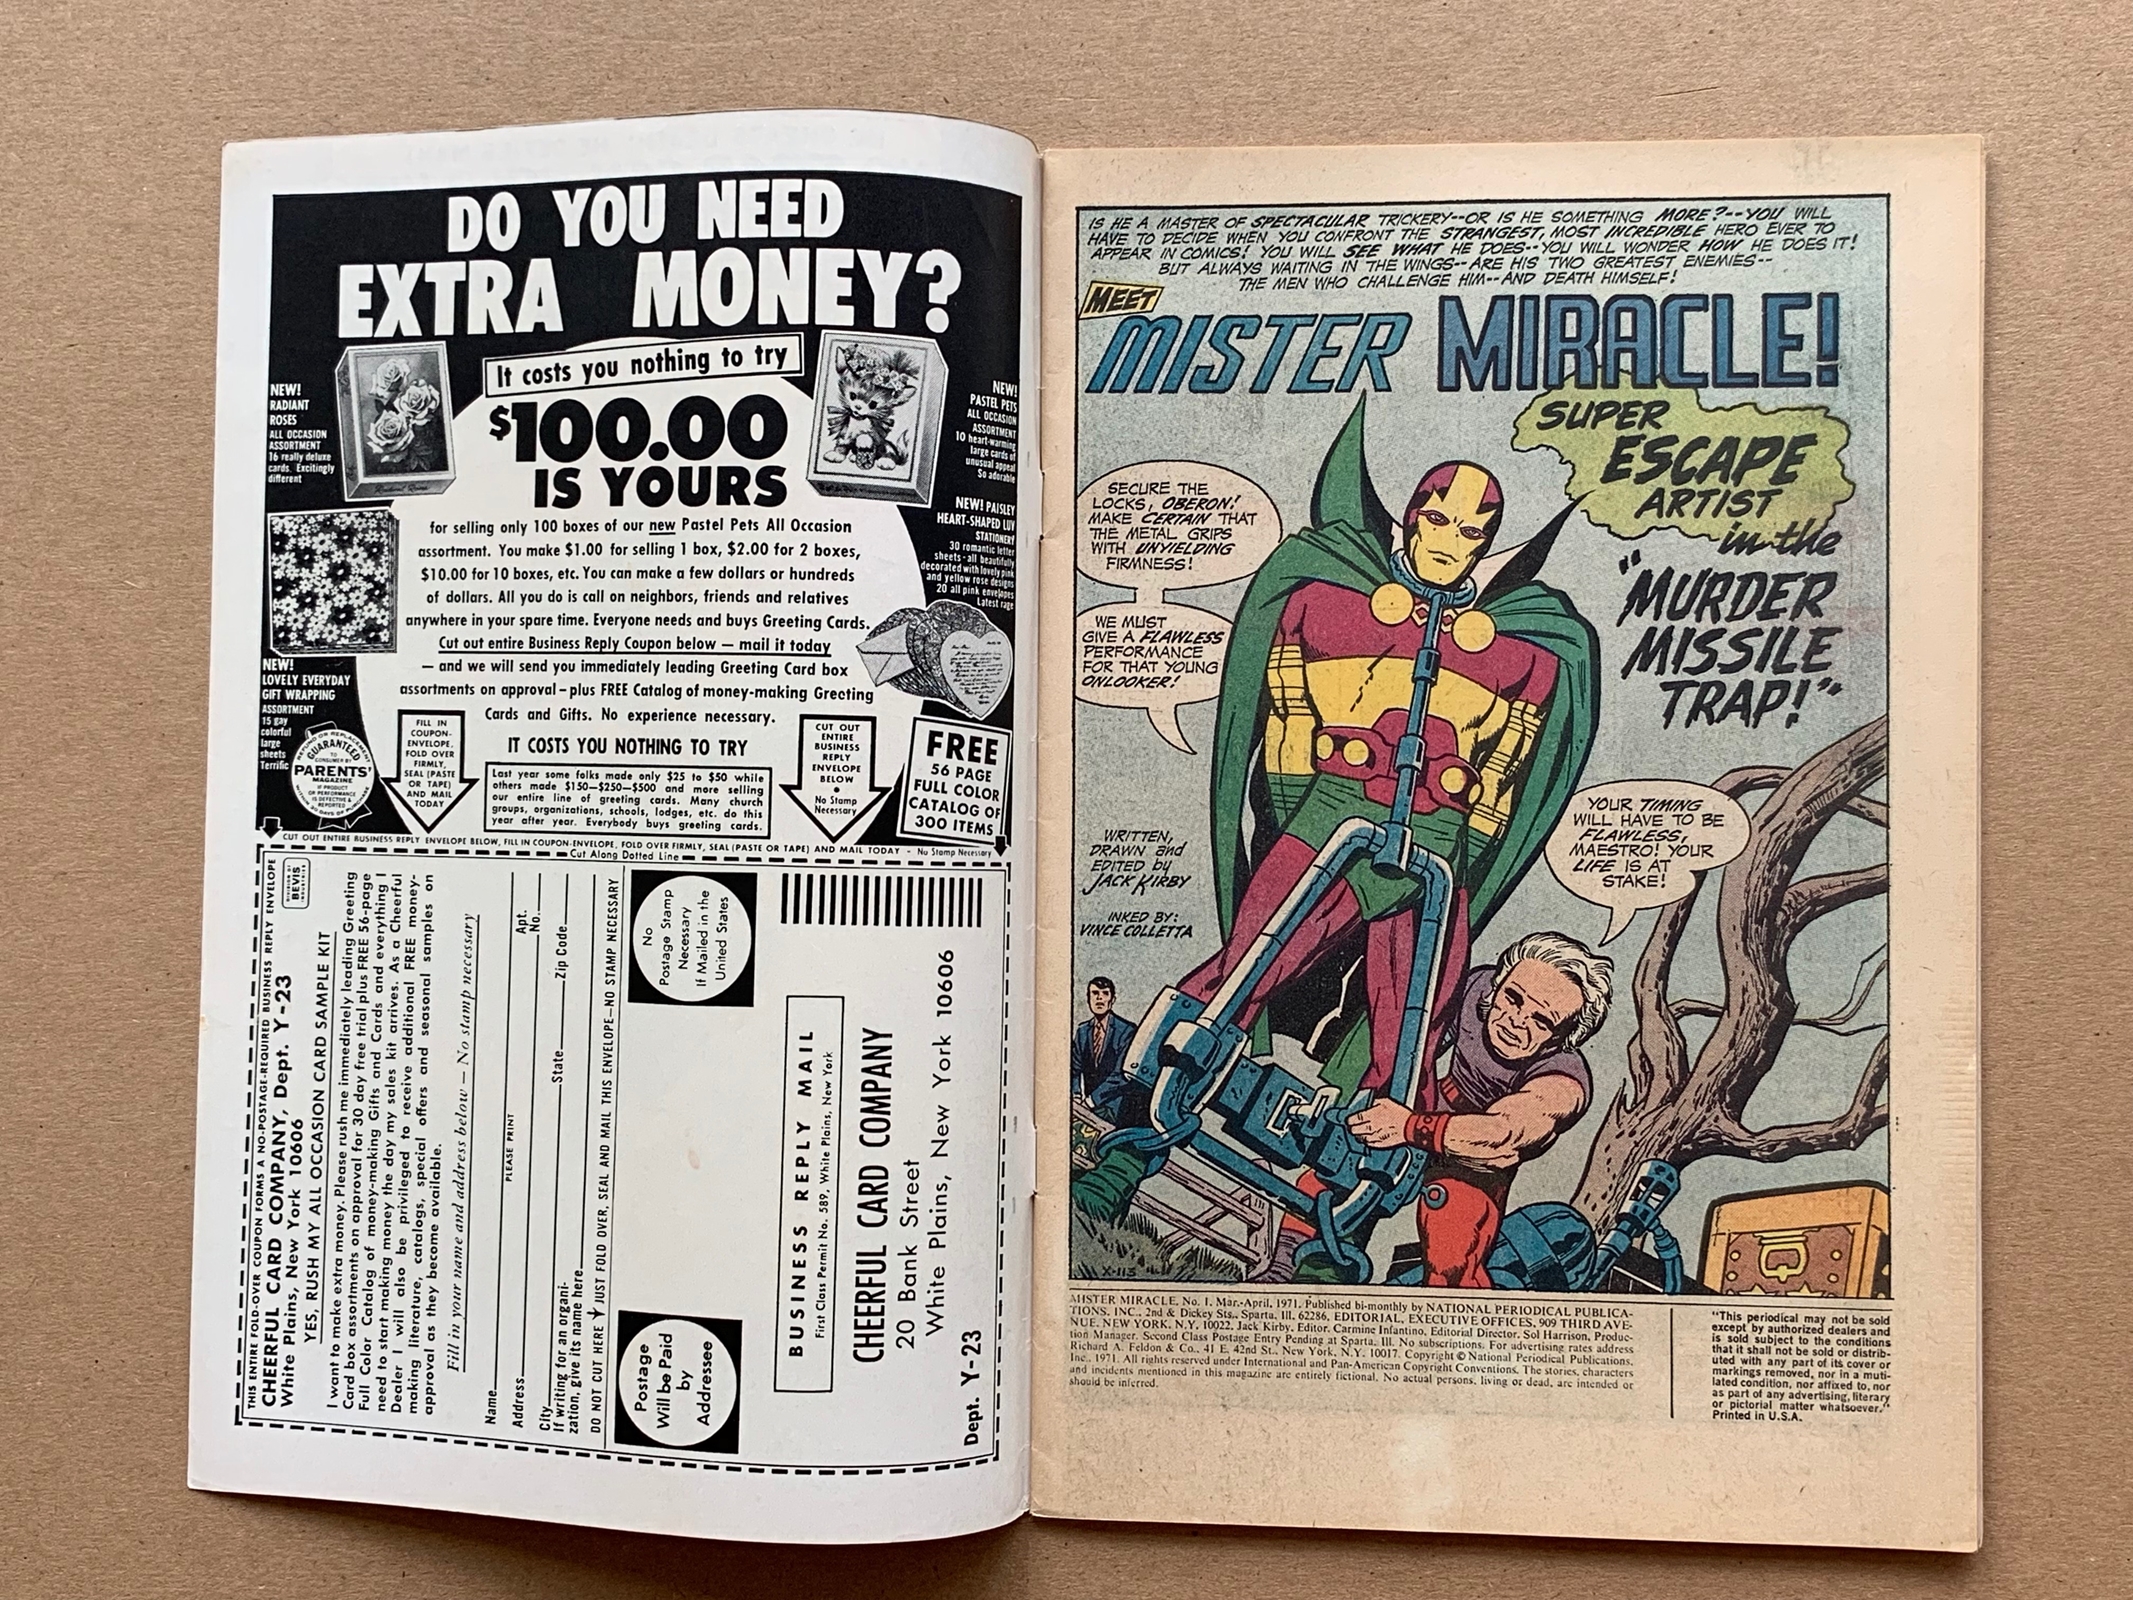 MISTER MIRACLE #1 (1971 - DC) VG/FN (Cents Copy) - First appearances of Mister Miracle and Oberon. - Image 10 of 10